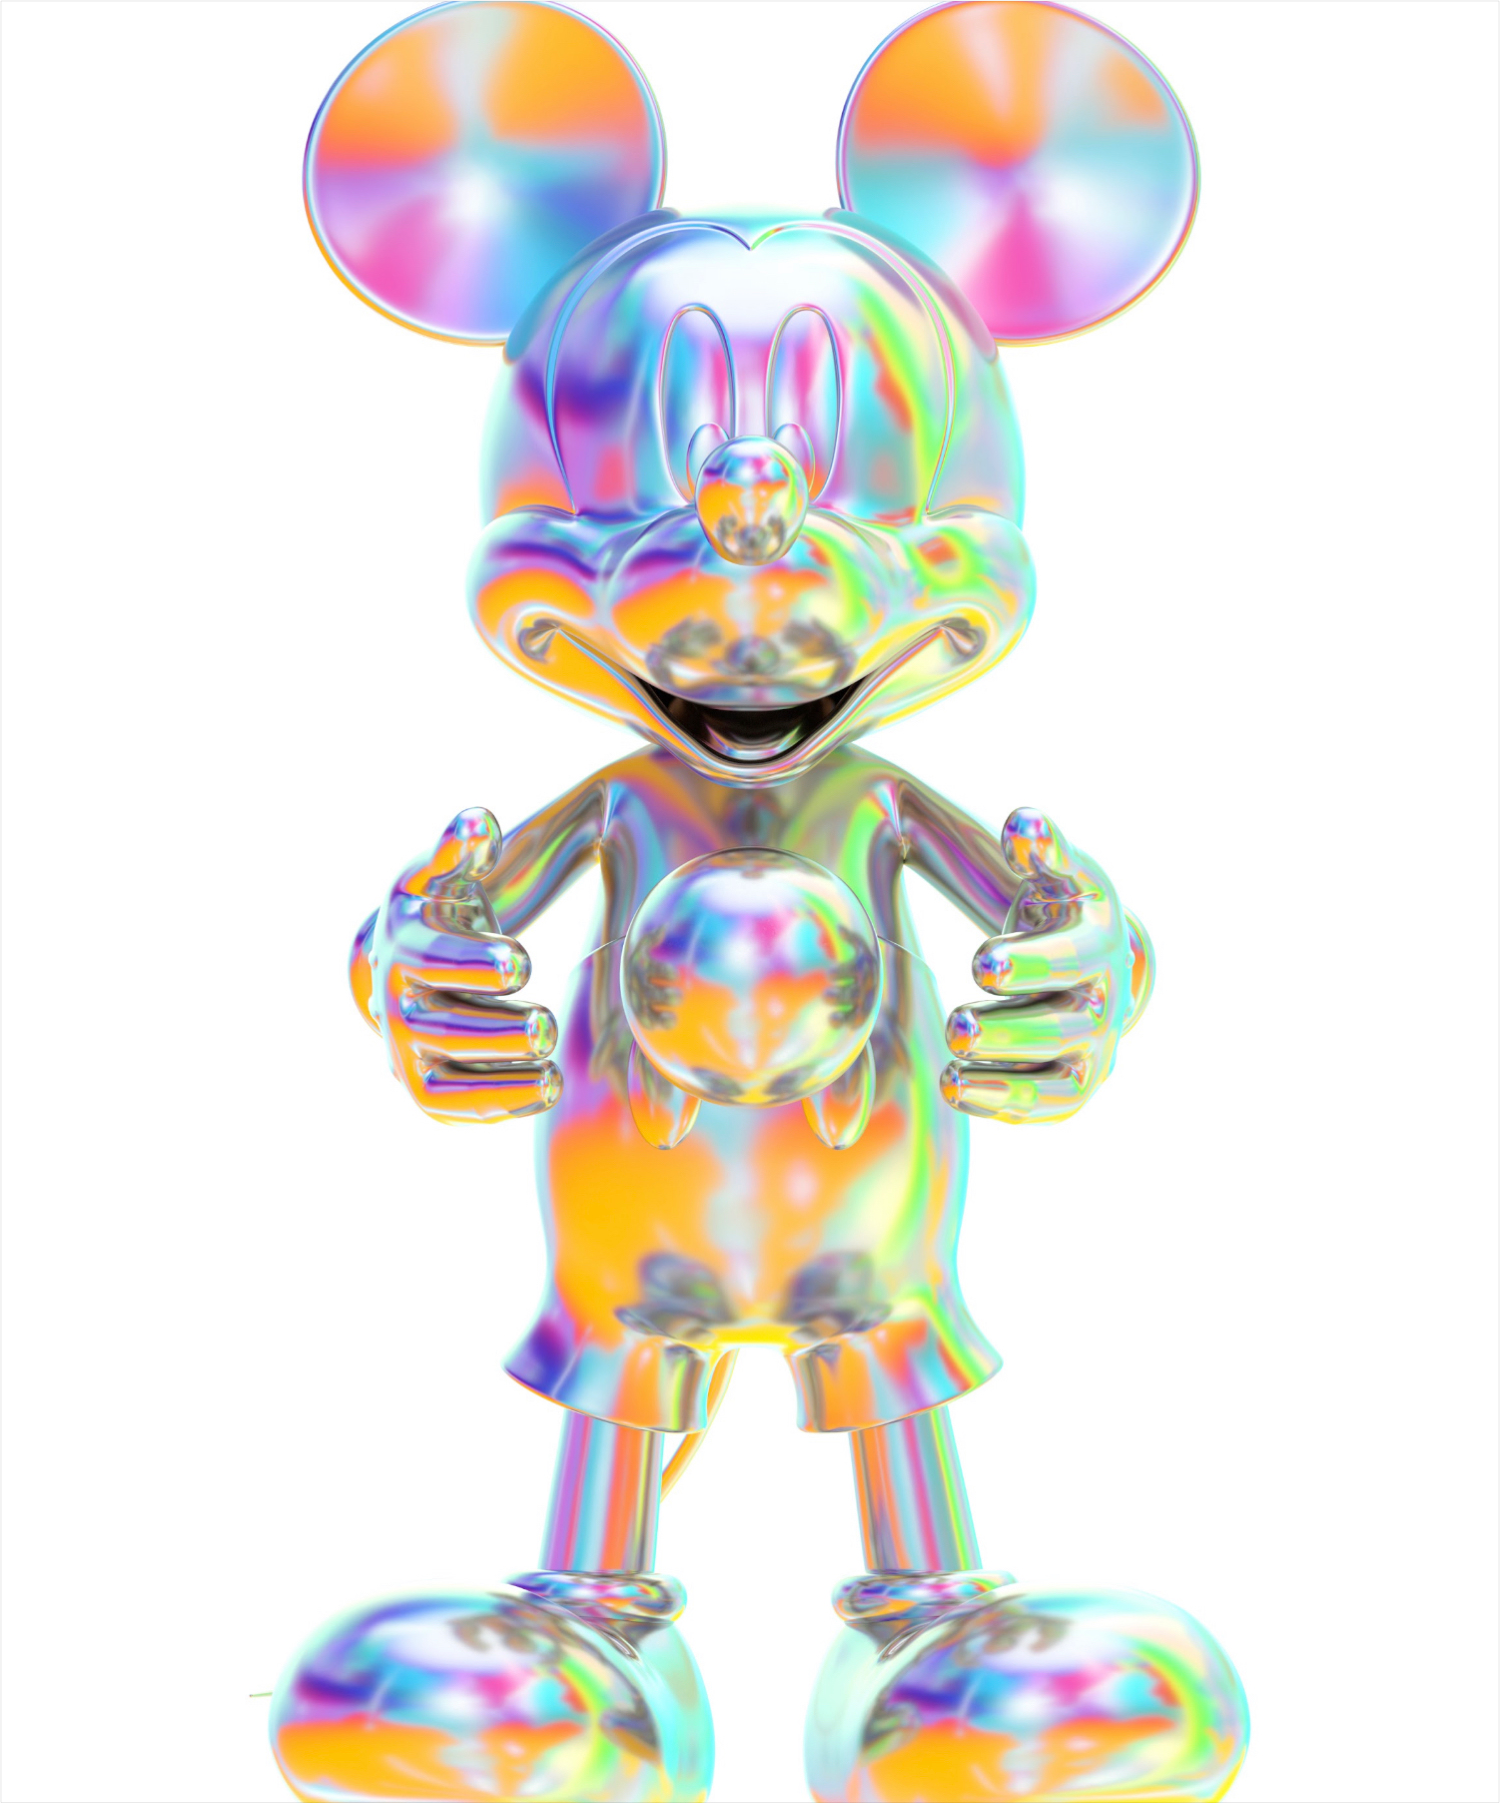 Tokyo: Mickey Mouse Now and Future | superfuture®